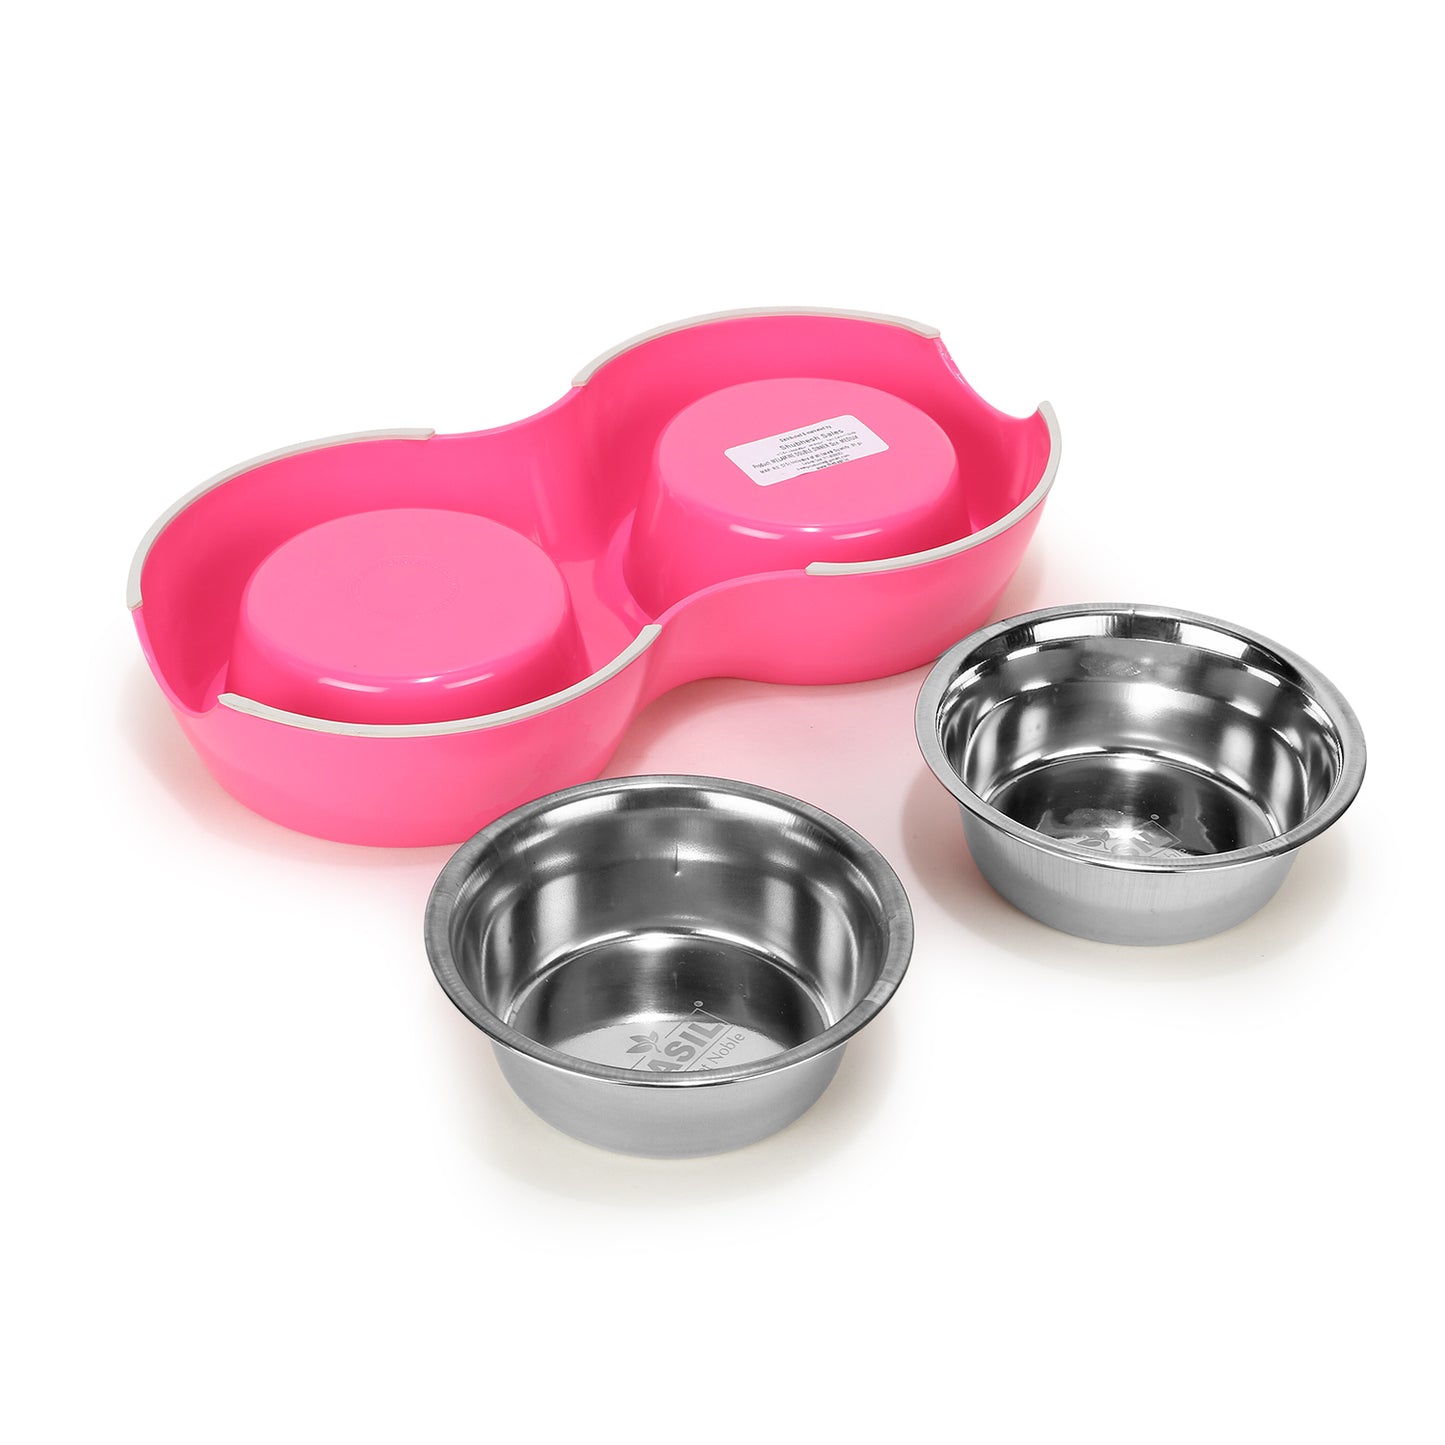 BASIL Melamine Double Dinner Set Pet Feeding Bowls for food and water (Pink)